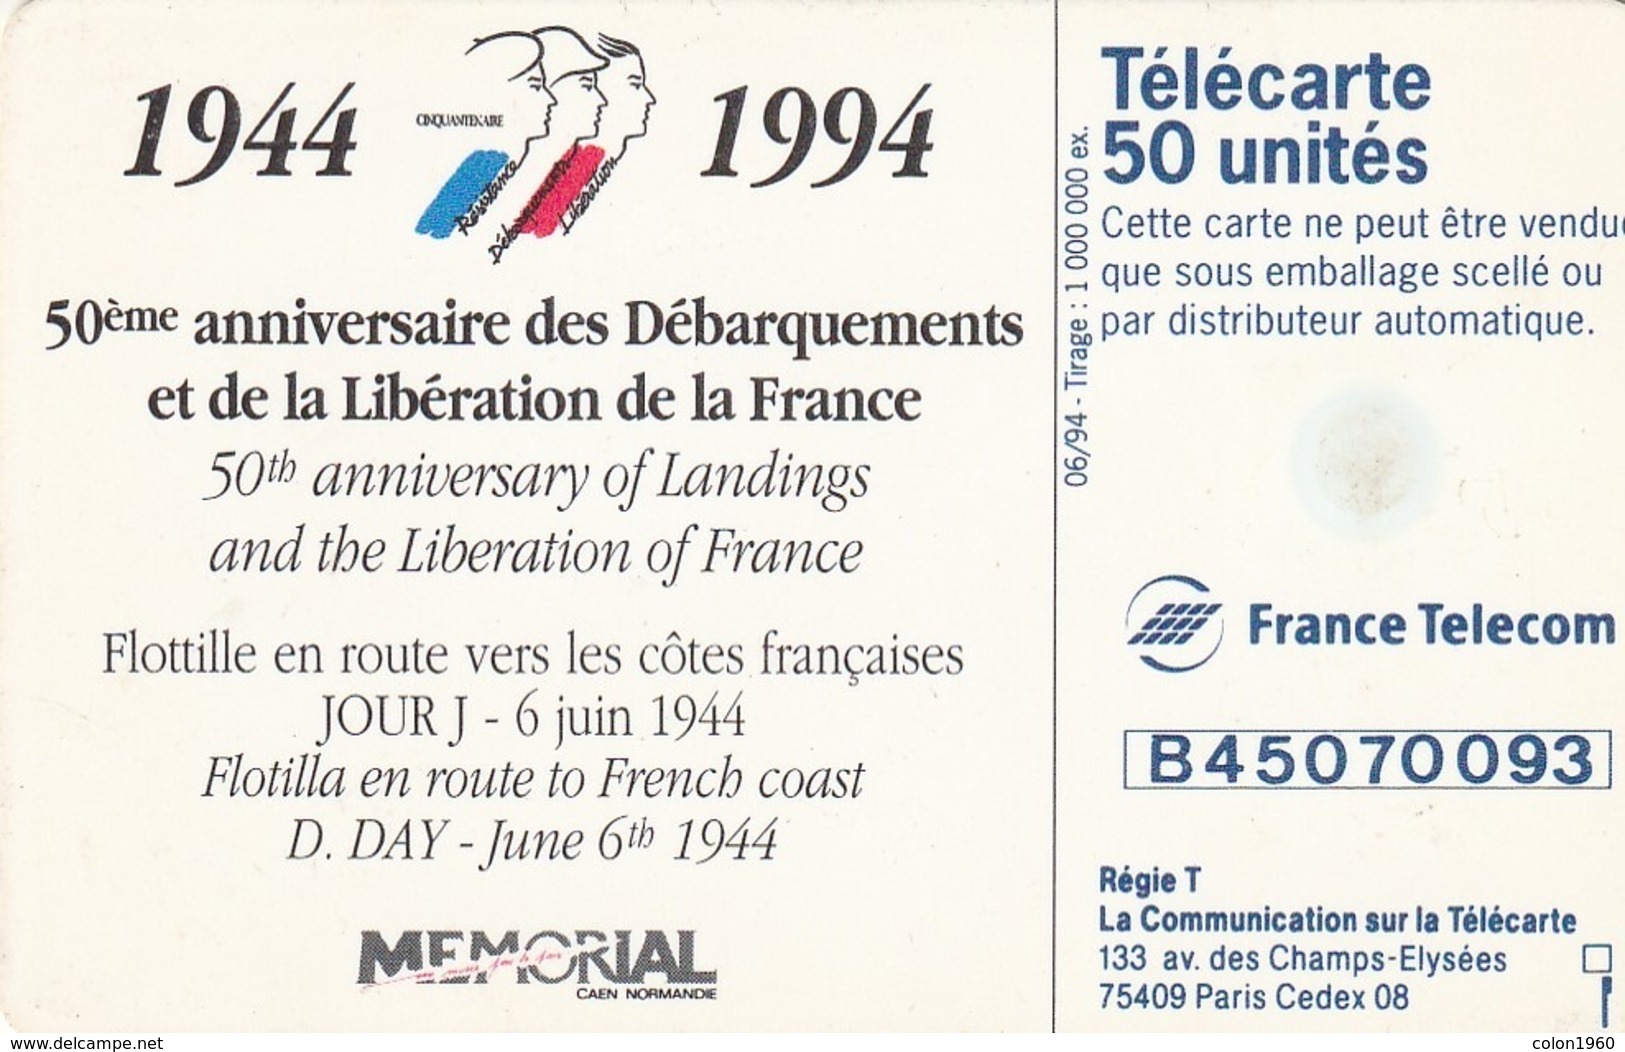 FRANCIA. 50th Anniversary Of Landings And The Liberation Of France. Debarquement Flotille. 0474. 06/94. (309). - Army